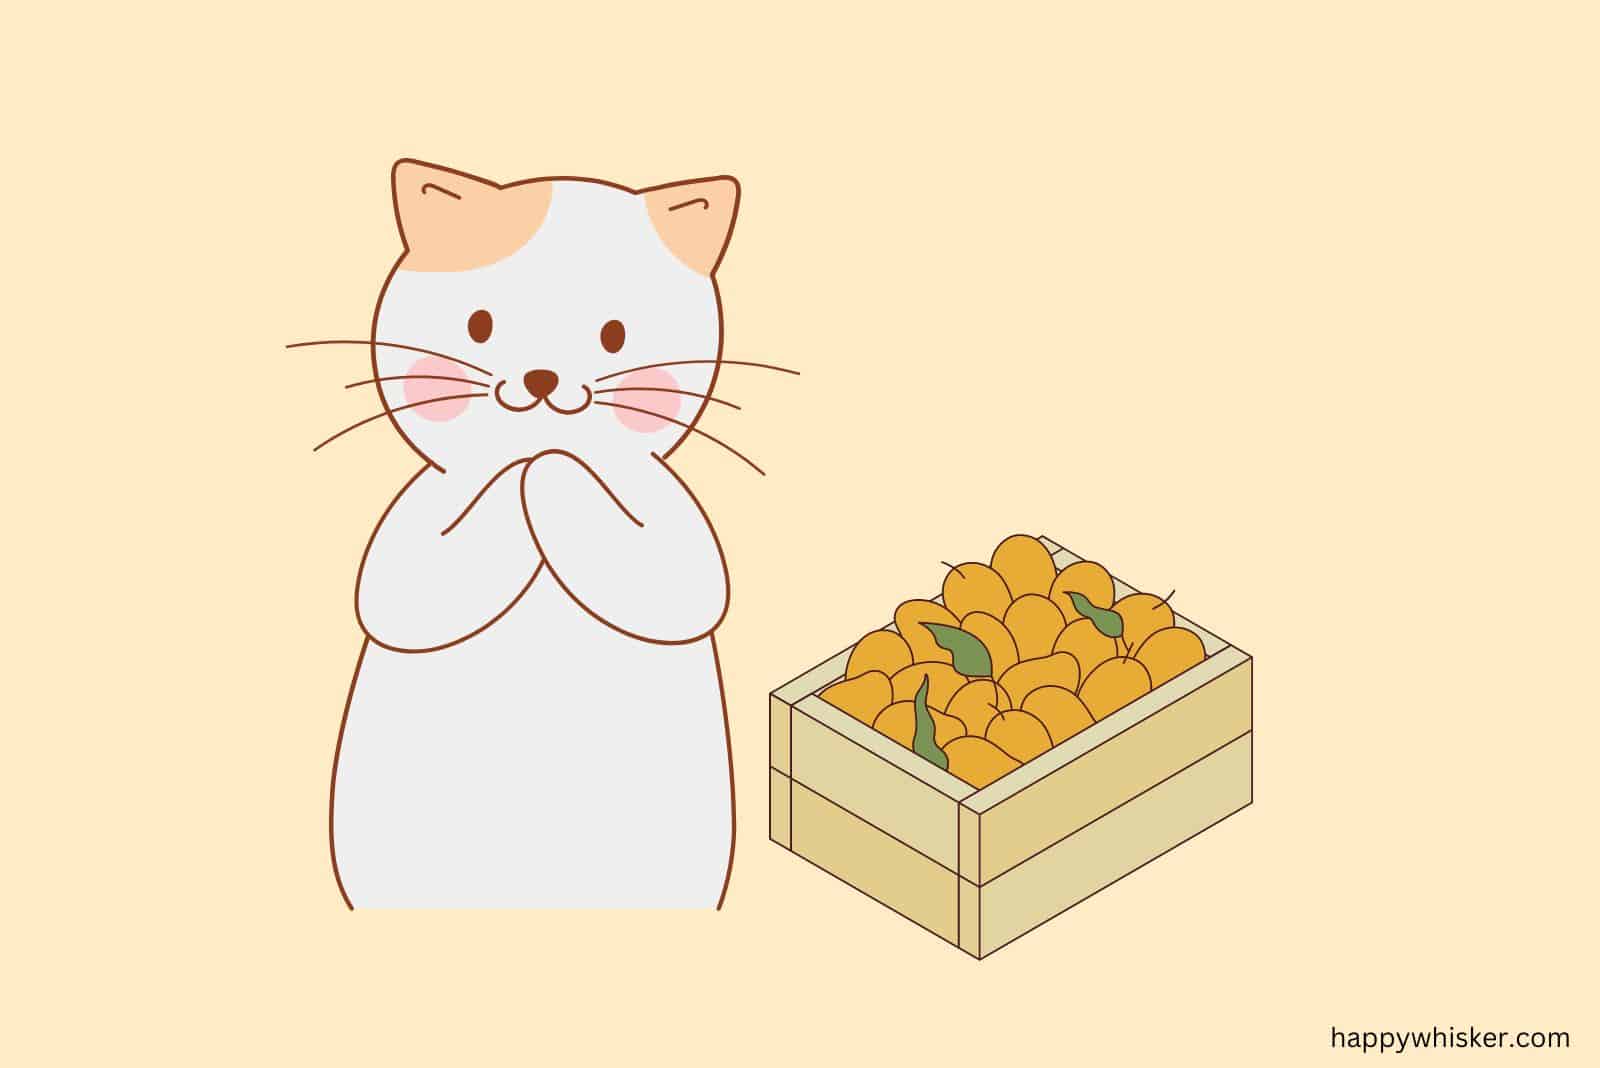 an adorable cat is standing next to a basket of mangoes